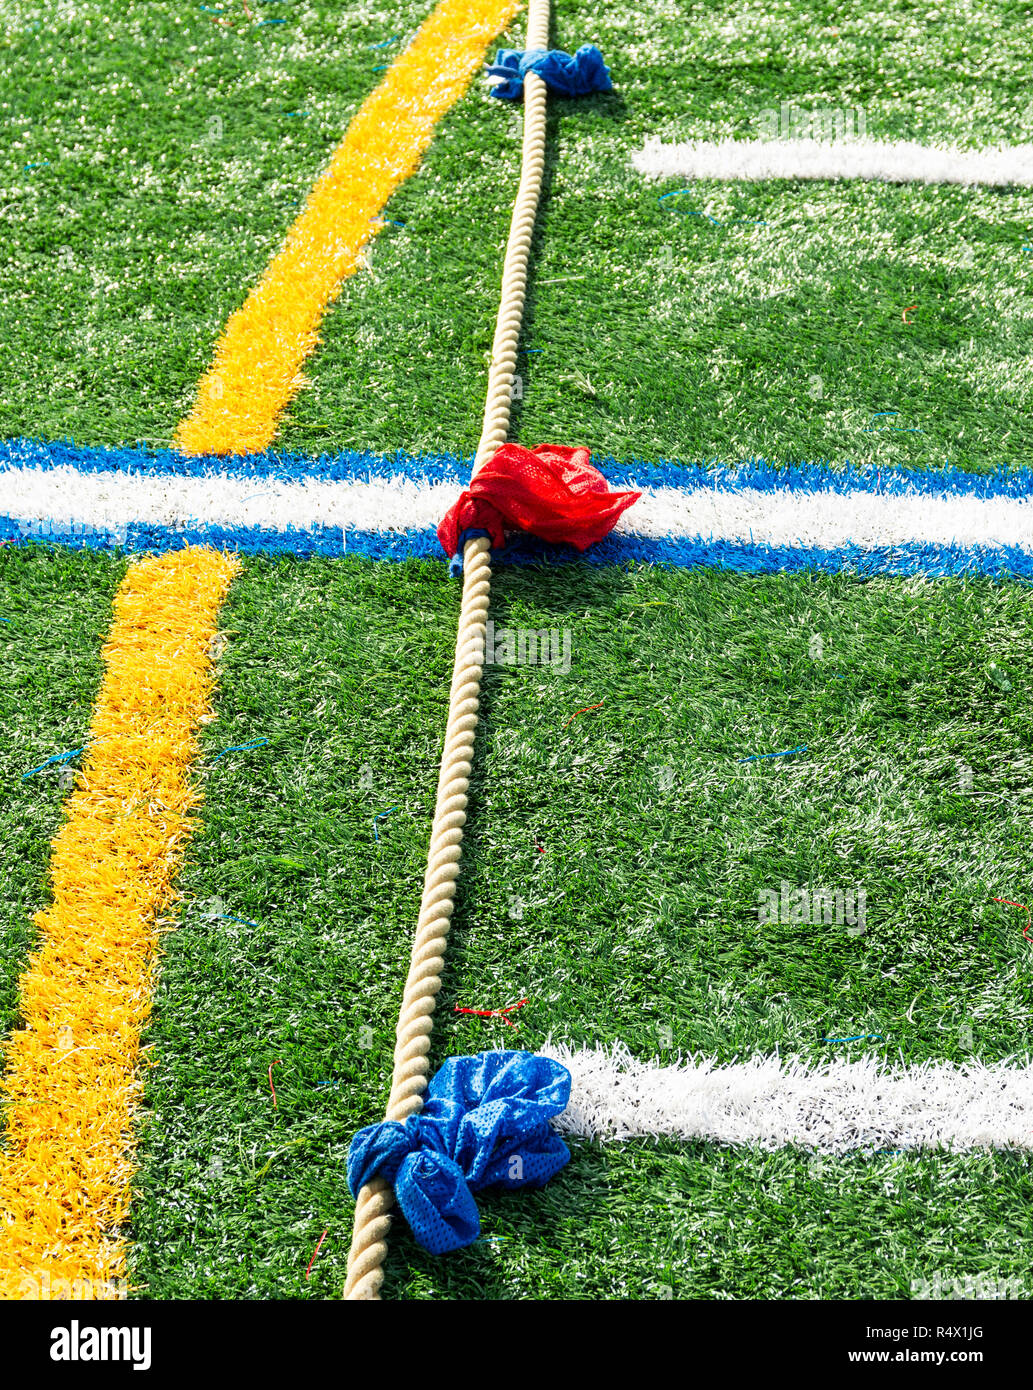 A tug of war rope with blue and red markers on it lying on a green turf  field ready for the next game Stock Photo - Alamy